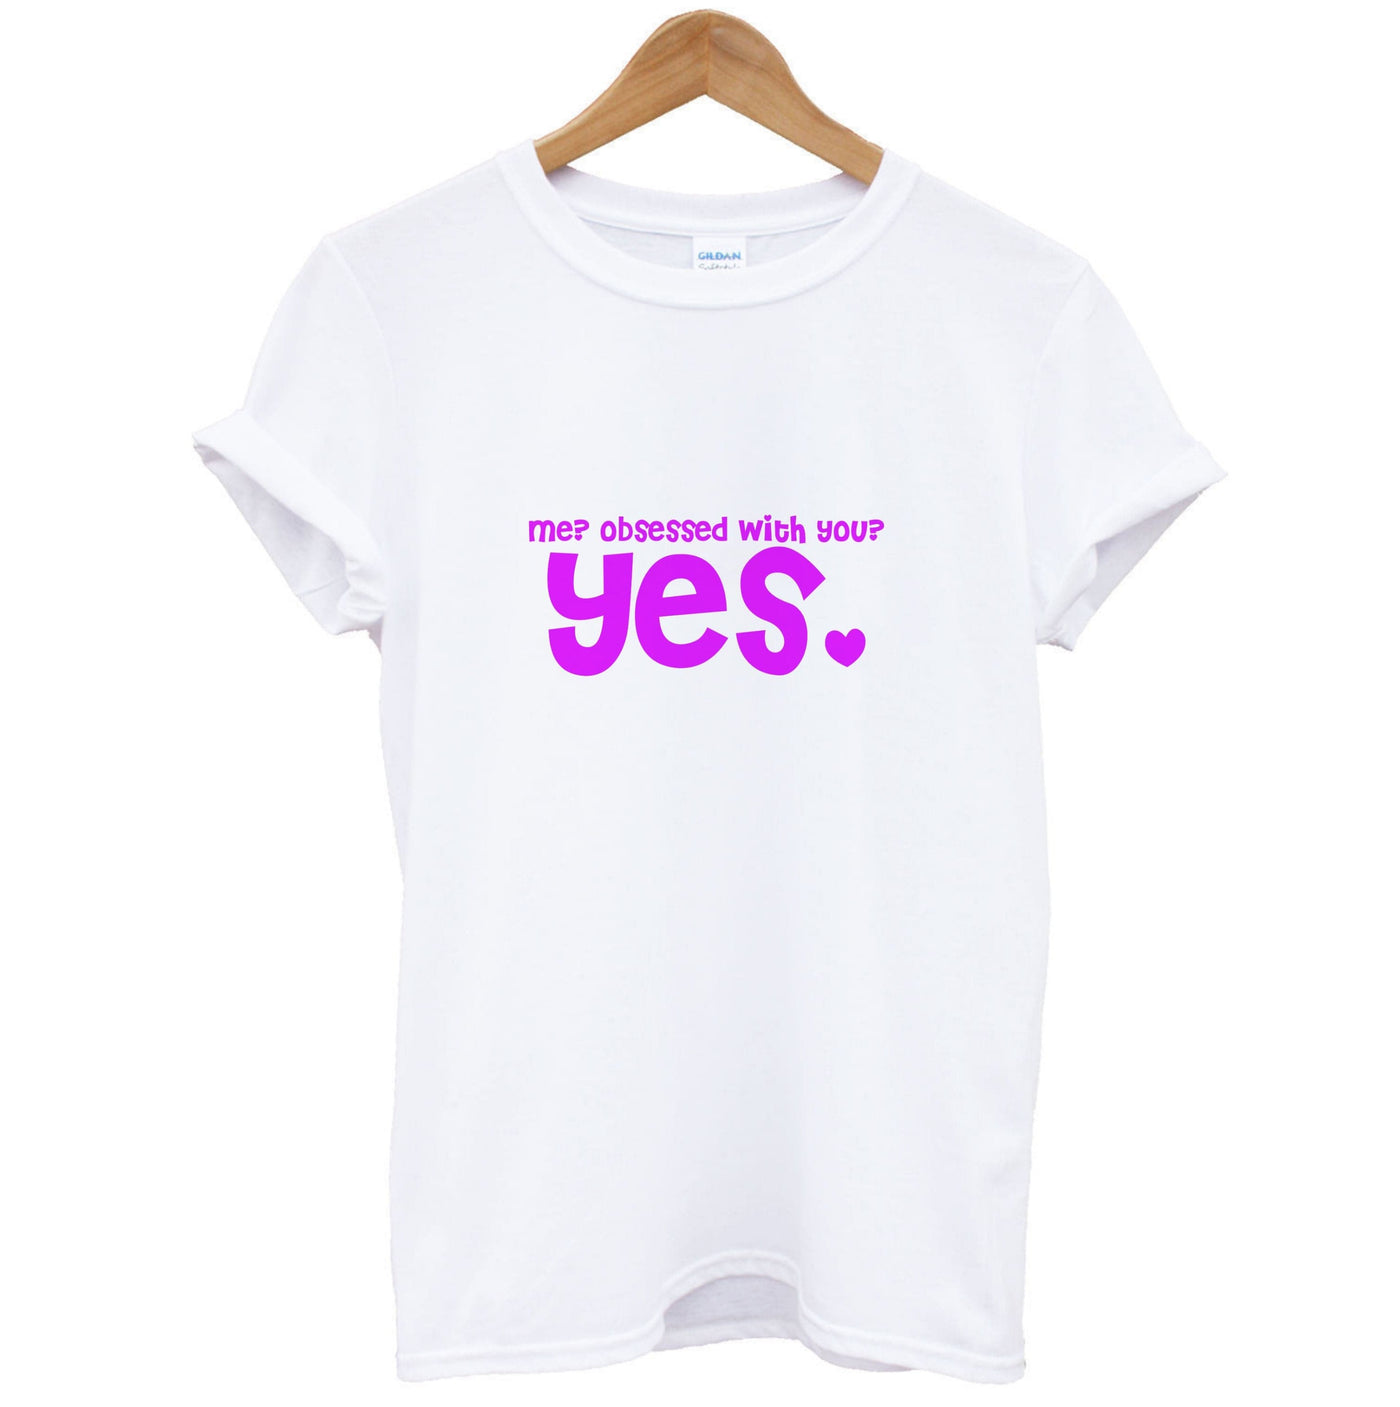 Me? Obessed With You? Yes - TikTok Trends T-Shirt